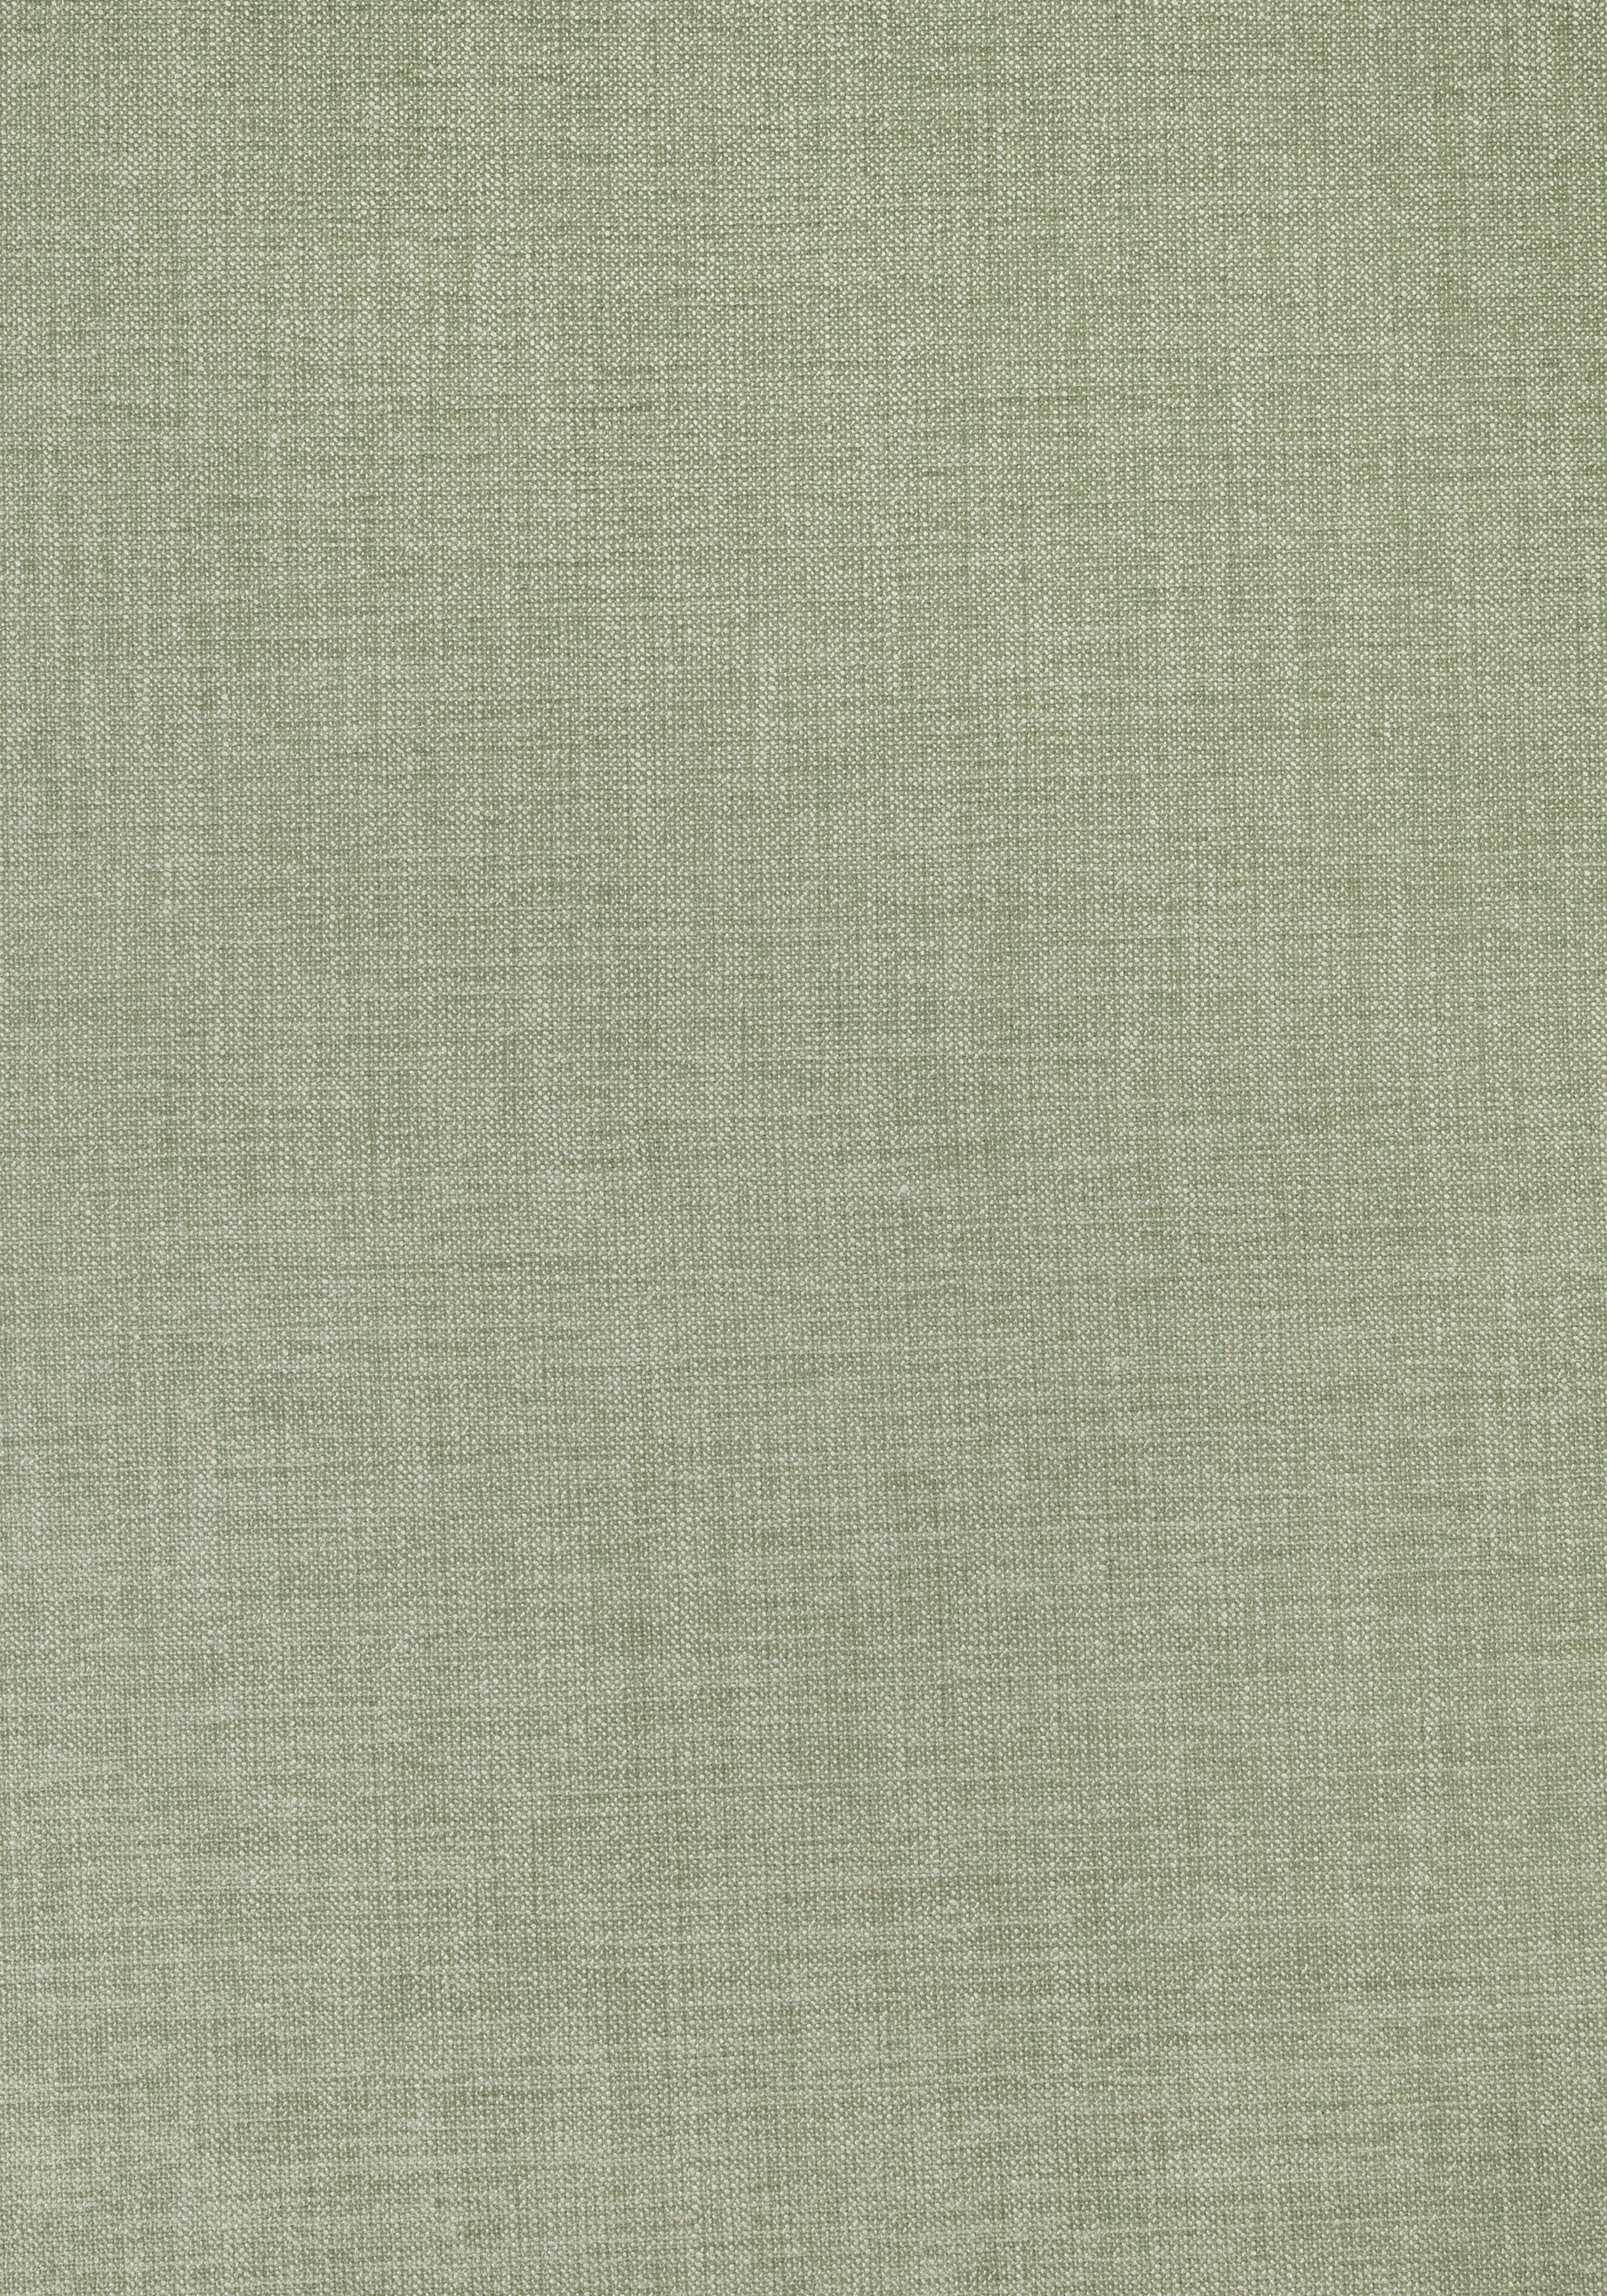 LUXE WEAVE, Sage, W724116, Collection Woven 8: Luxe Textures from ...